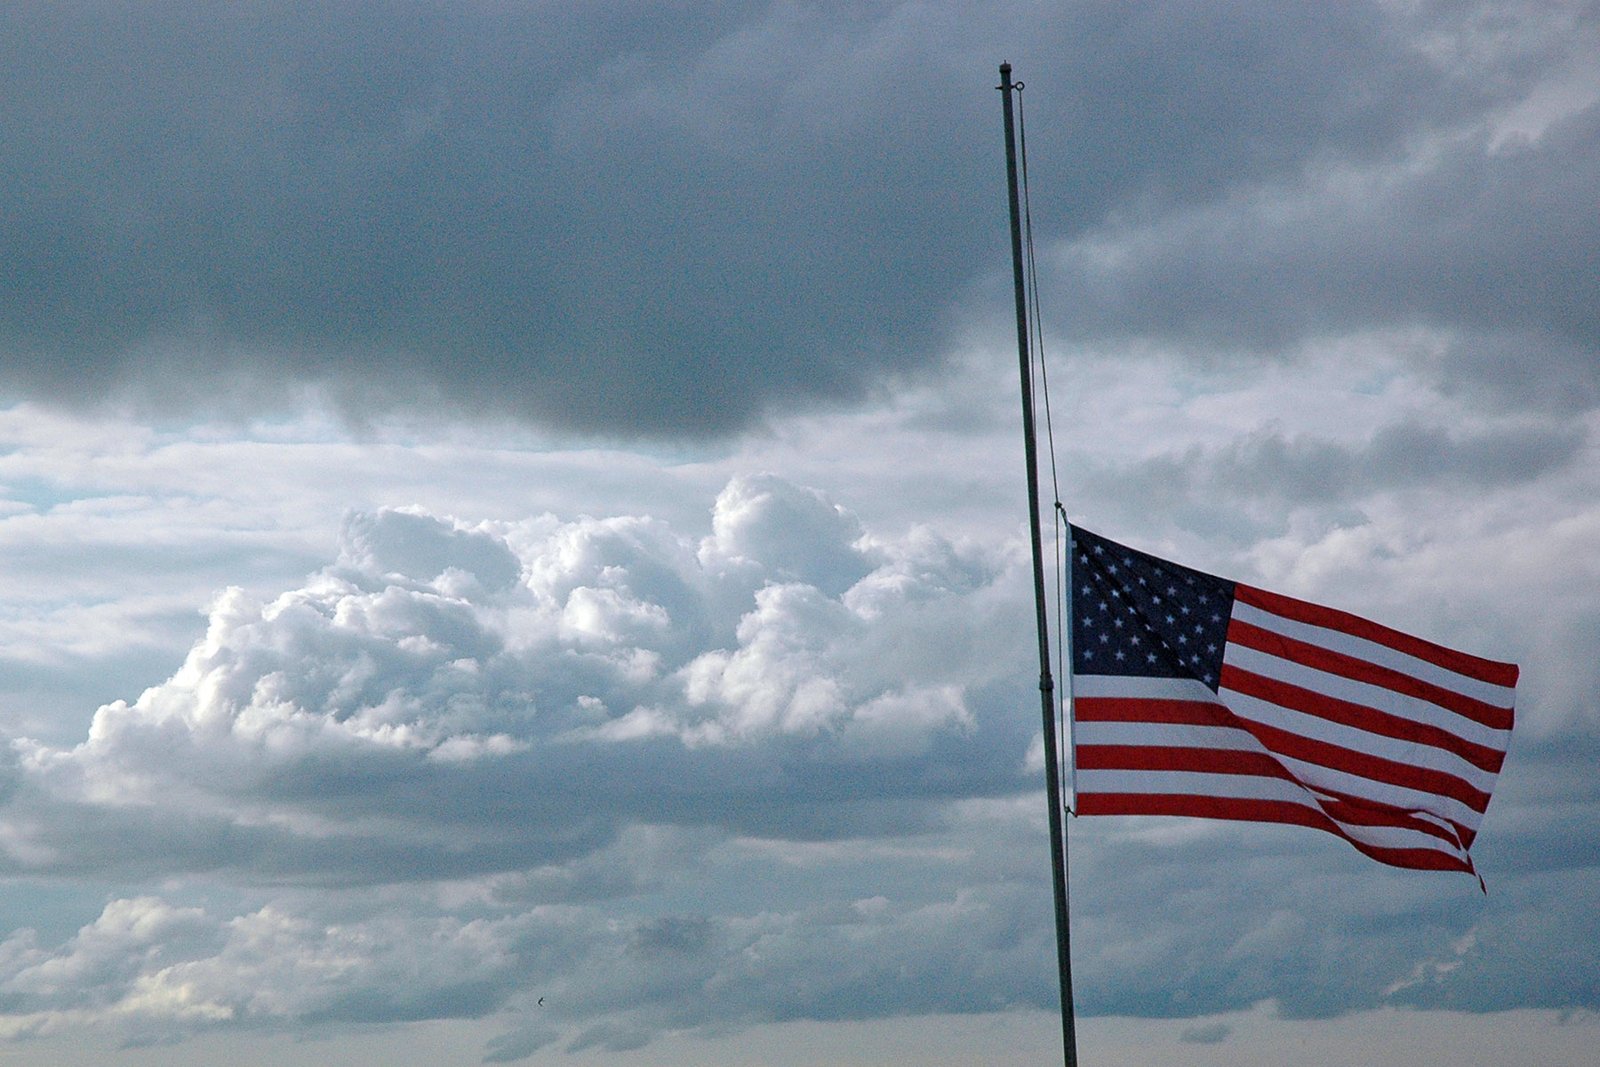 When the Banner Remains at Half-Staff